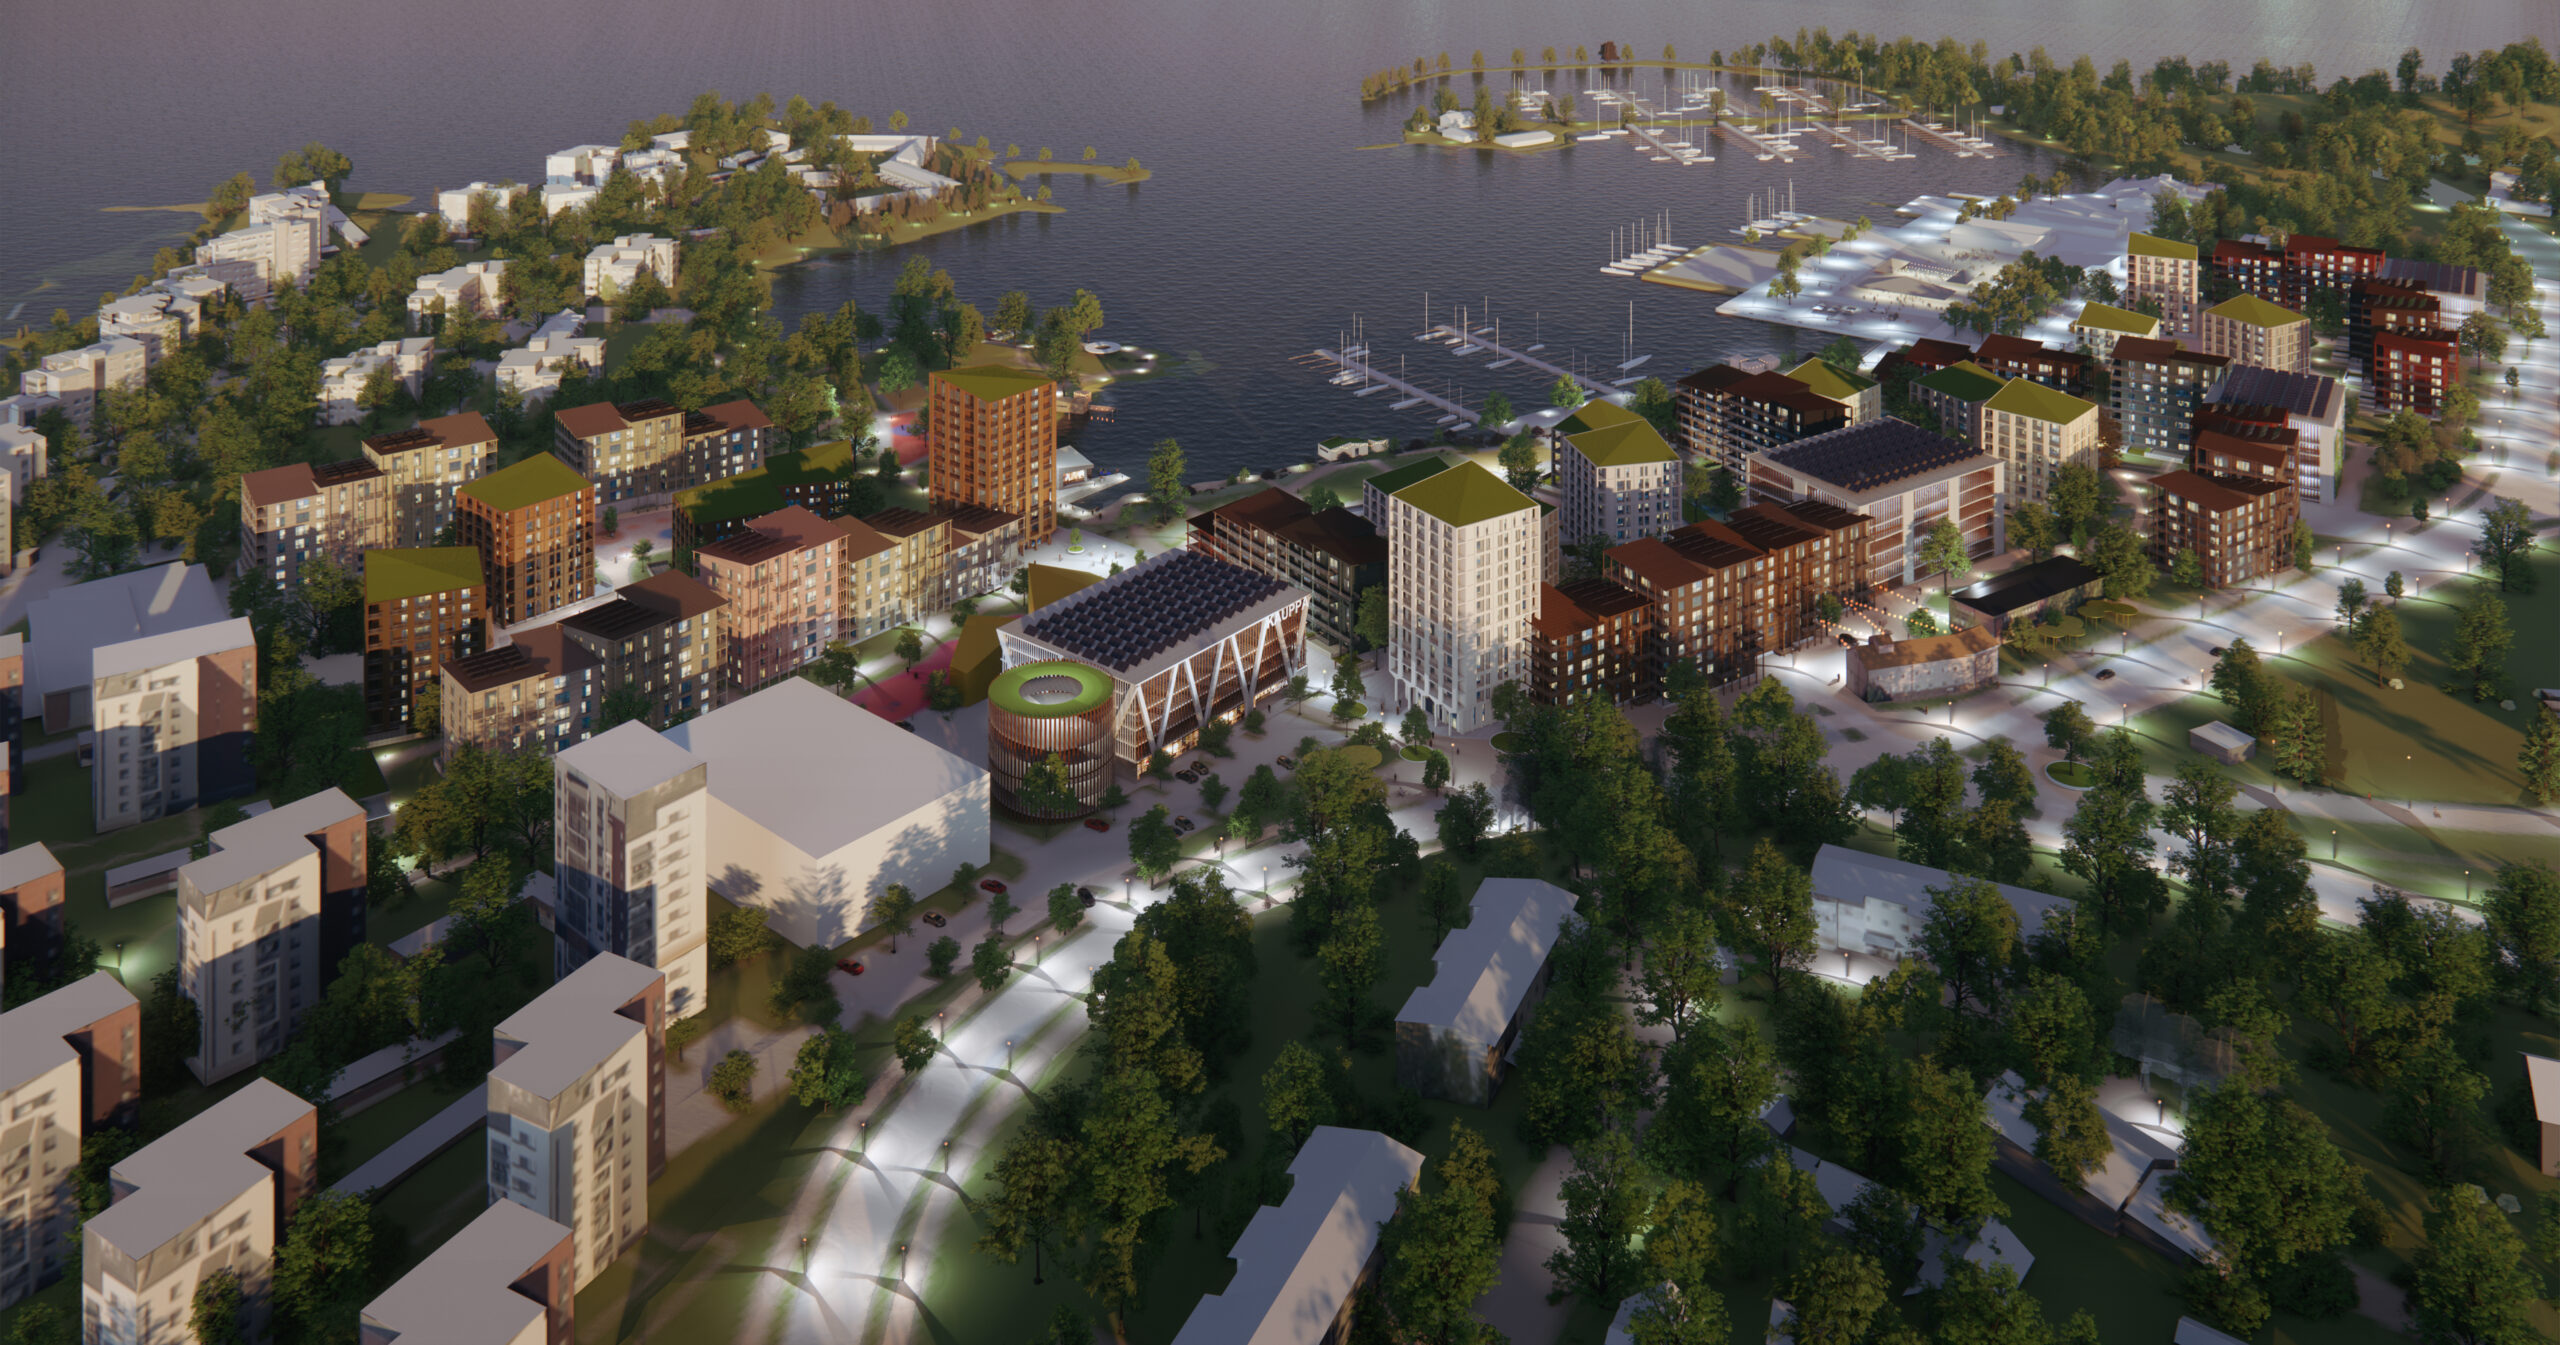 LPR Architects take third place in the Lahti Niemi lakefront architectural competition